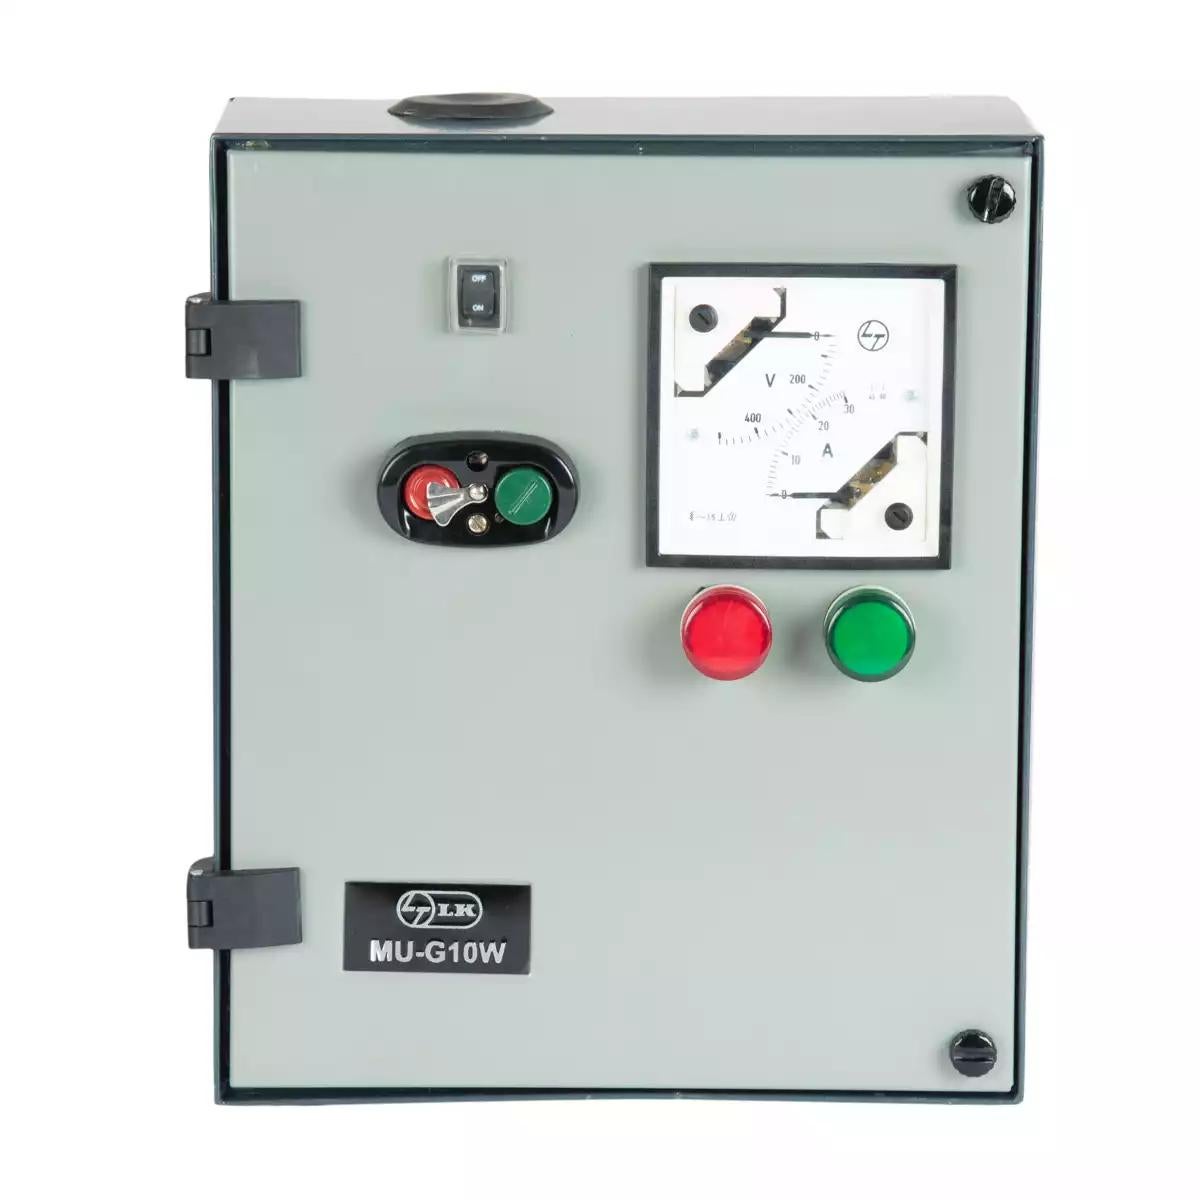 Three Phase DOL Controller with WLC for Submersible Pump Application,MU-G10W,10HP,DOL, CS91037COCO